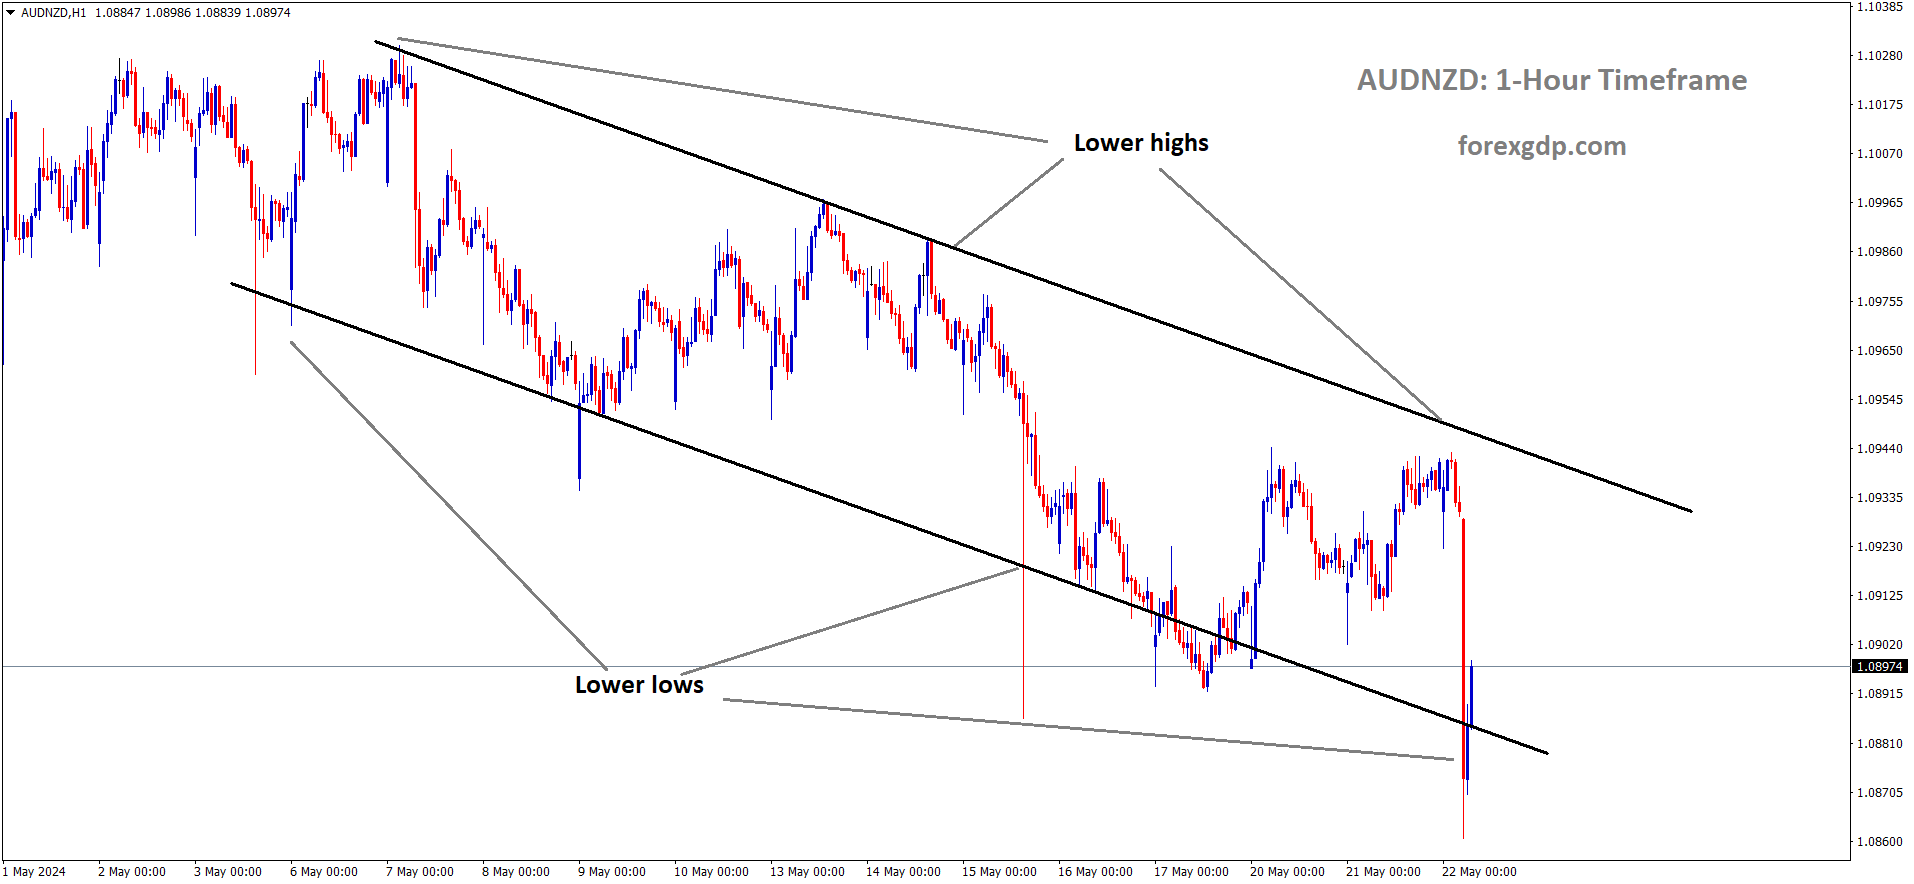 AUDNZD is moving in Descending channel and market has reached lower low area of the channel